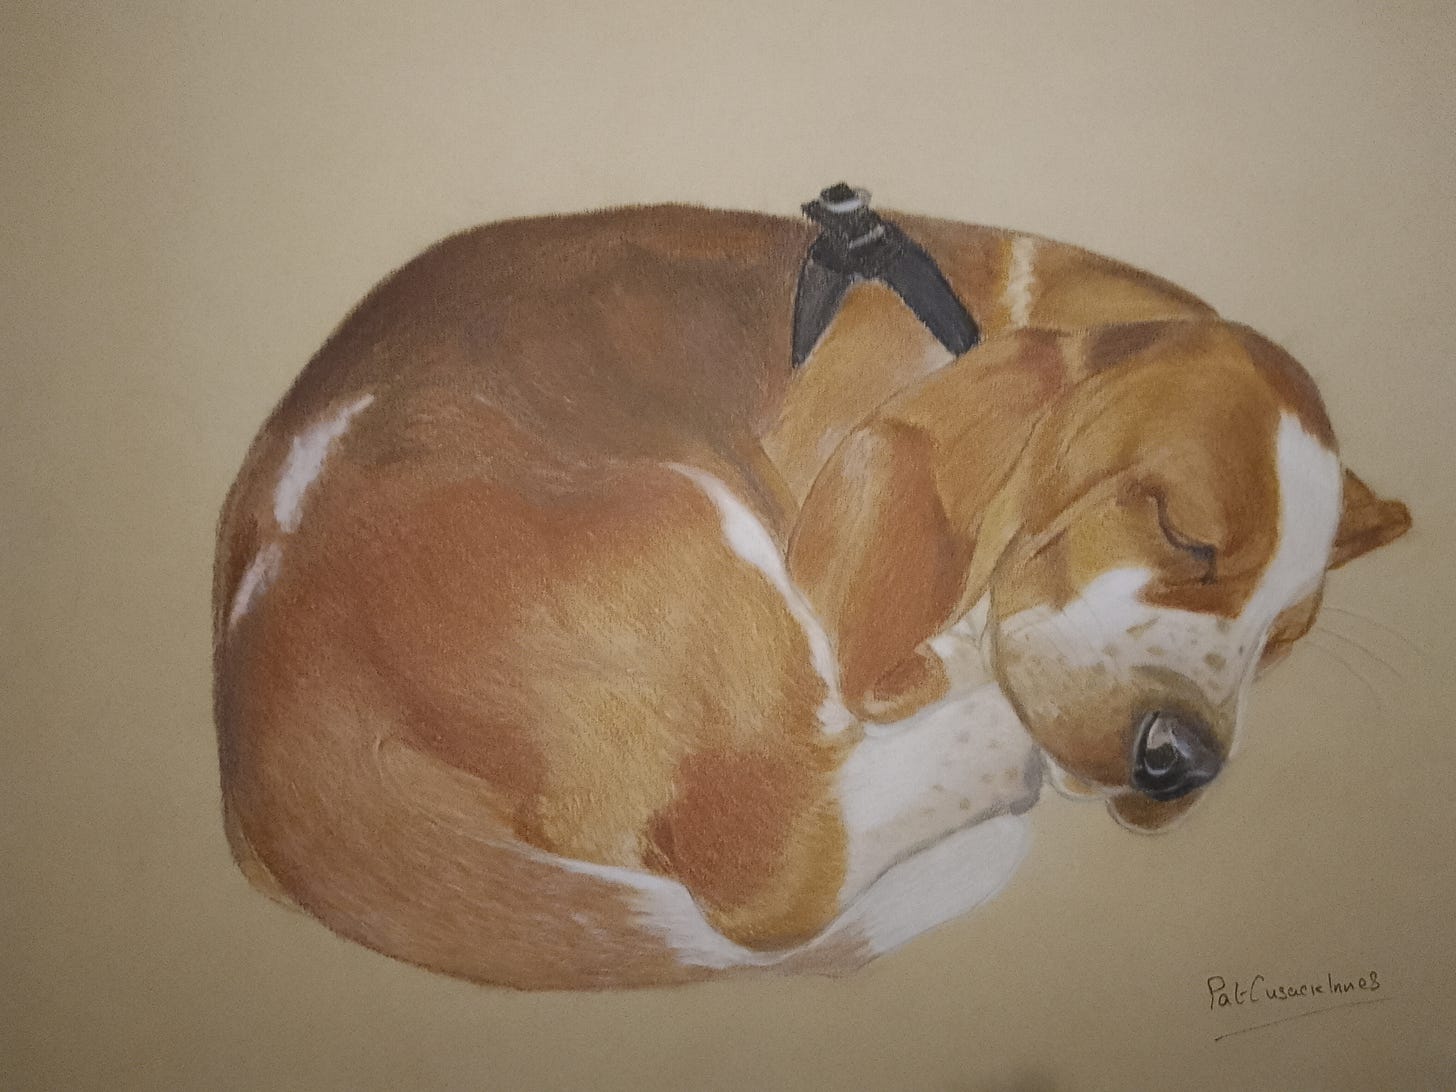 curled up sleeping Basset Hound in pastels with beautiful black shiny nose